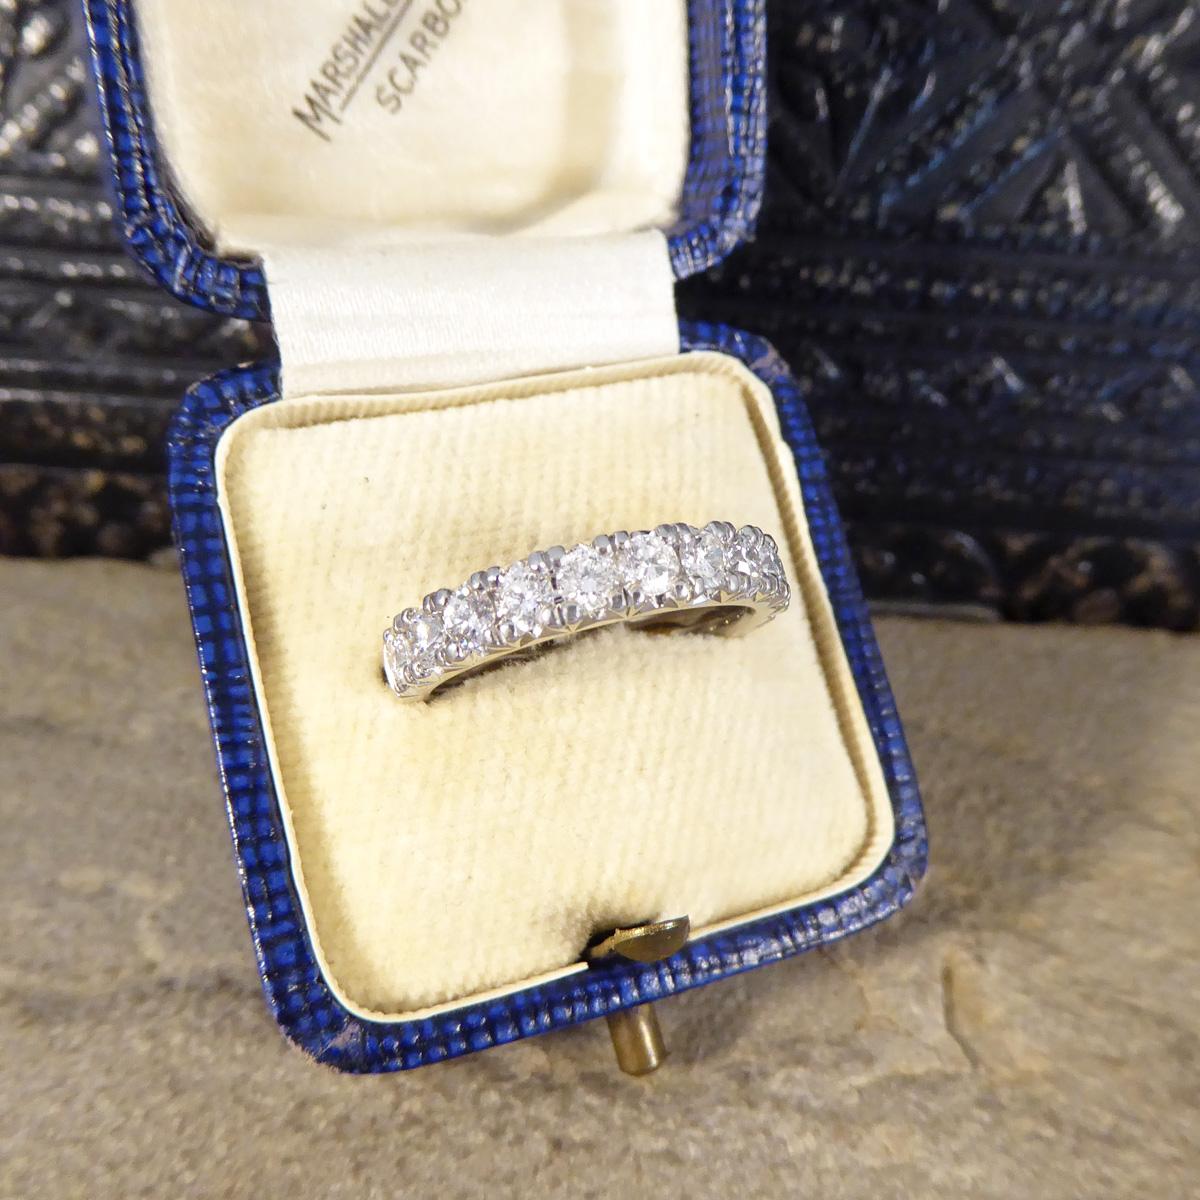 New Diamond Set Eternity Ring with 0.88ct Modern Brilliant Cut Diamonds in Plat For Sale 2